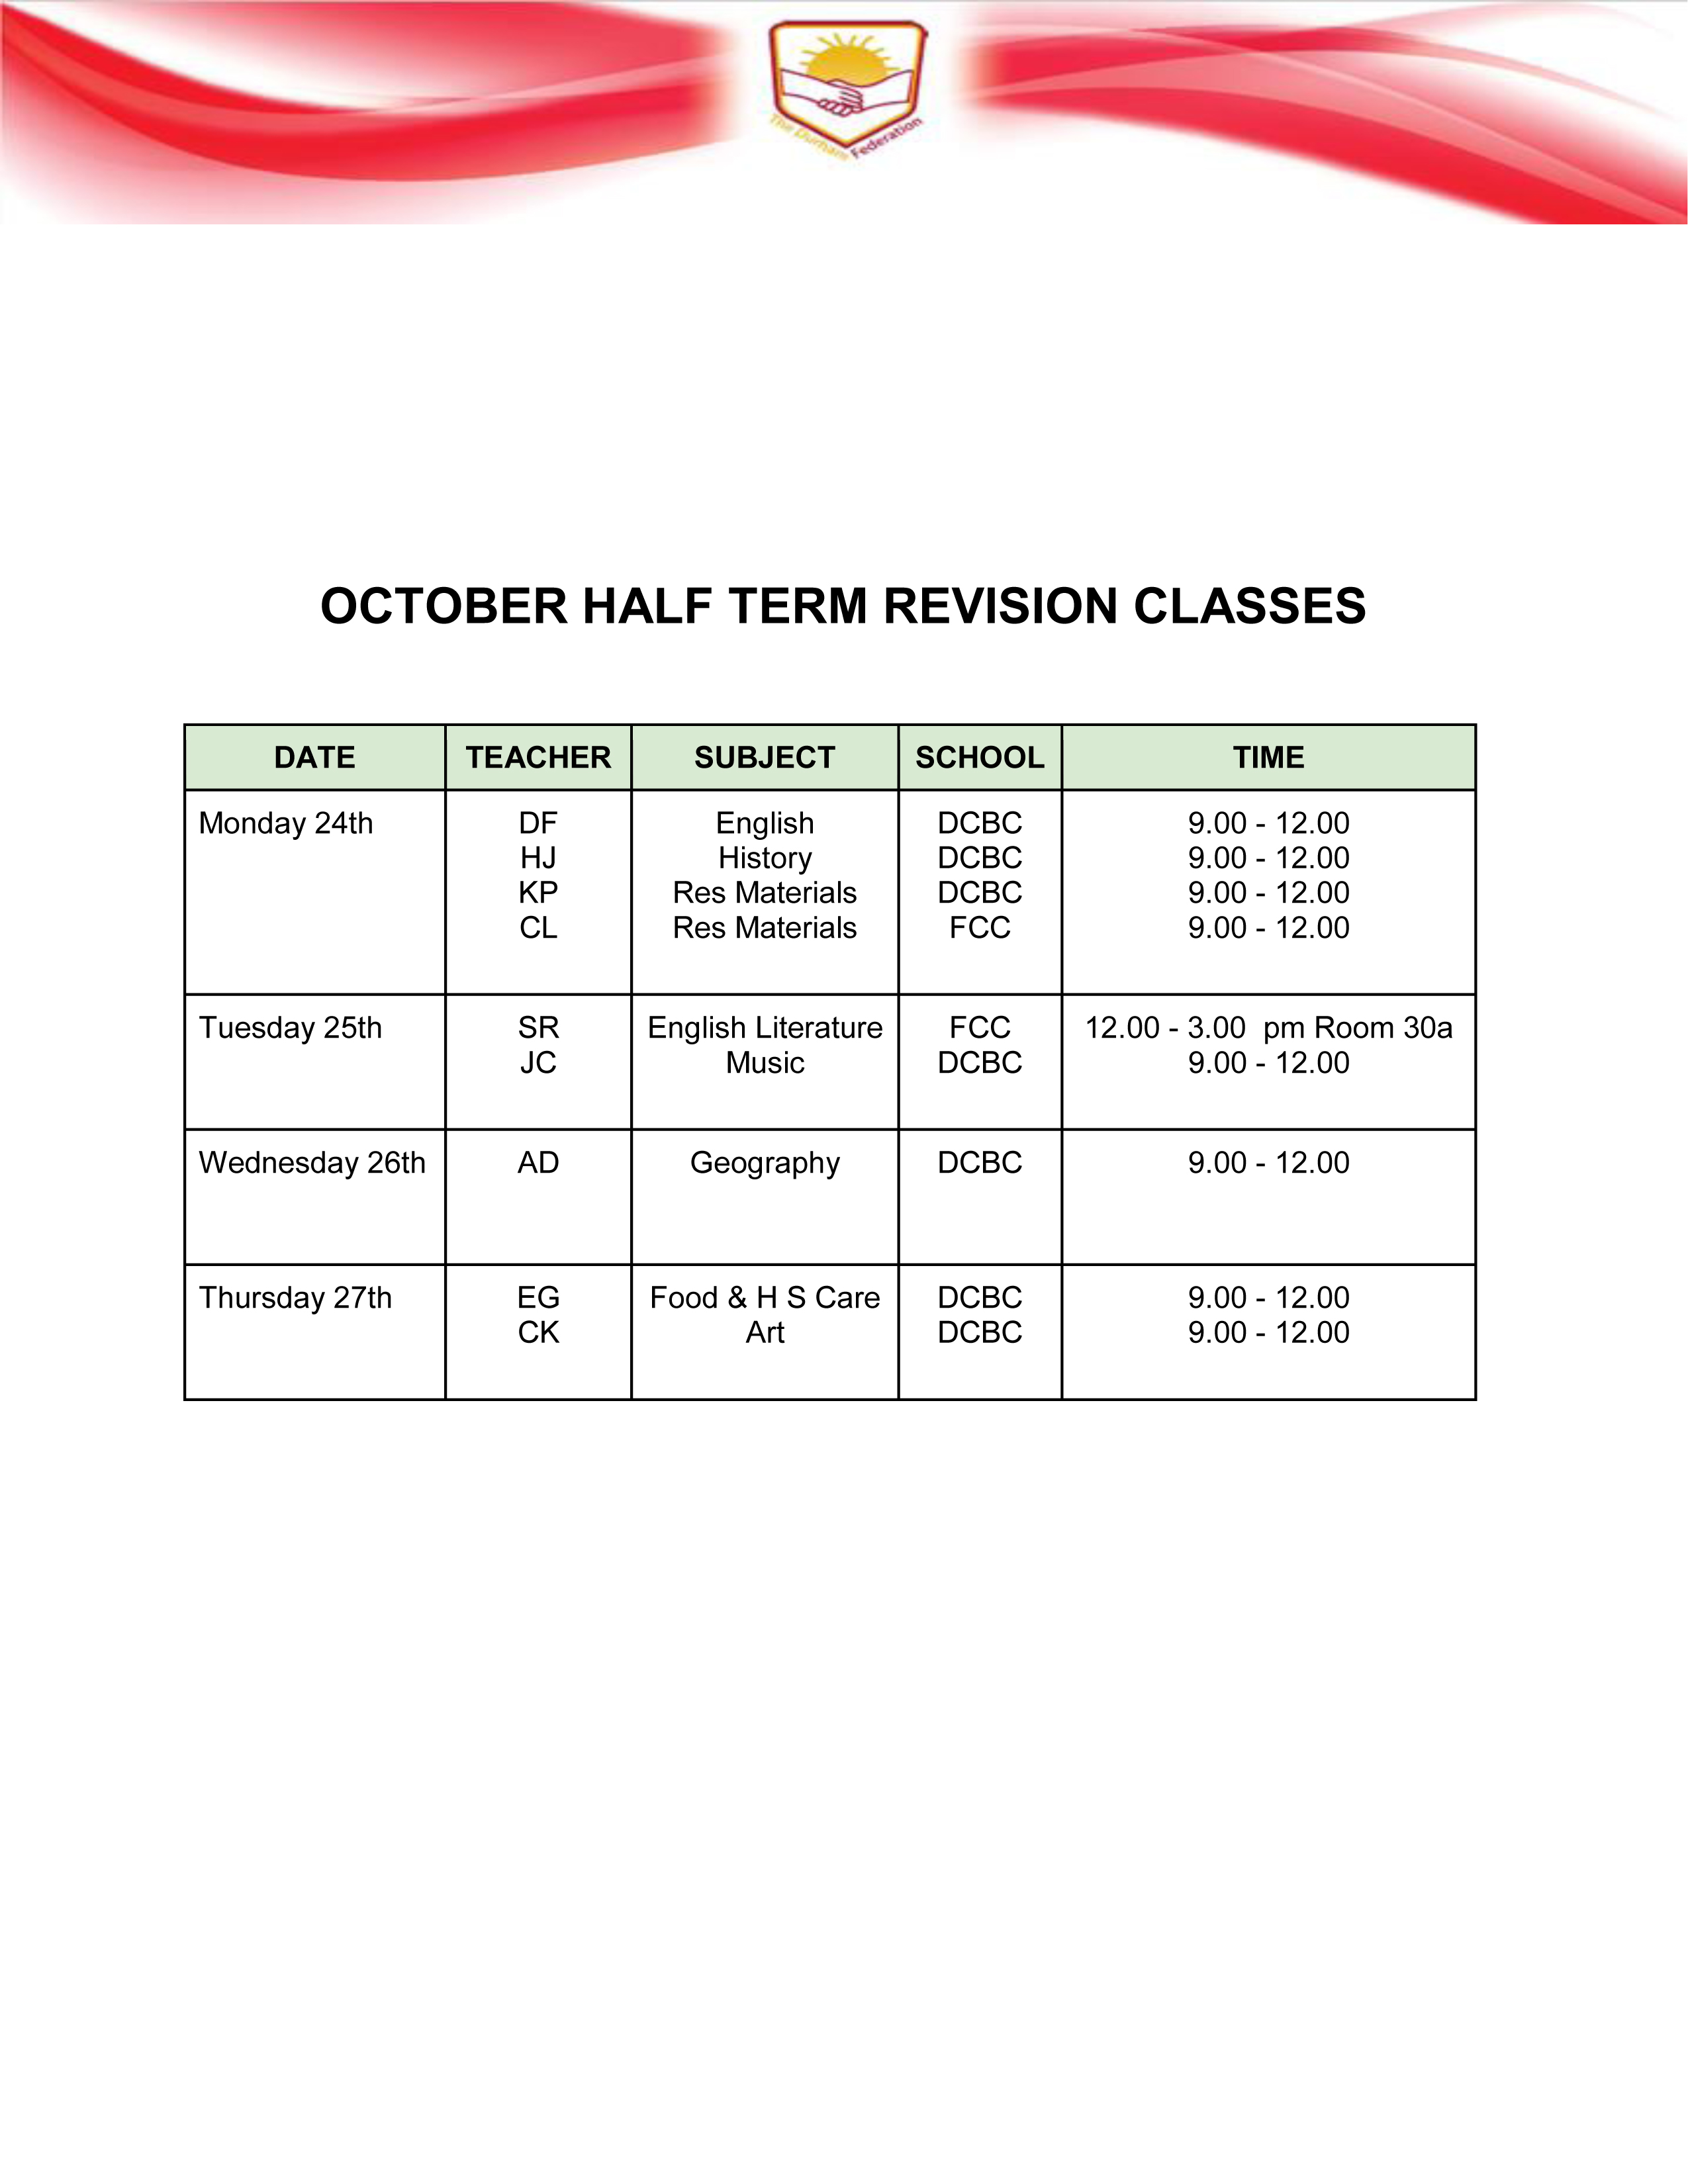 OCTOBERHALFTERMREVISIONCLASSES